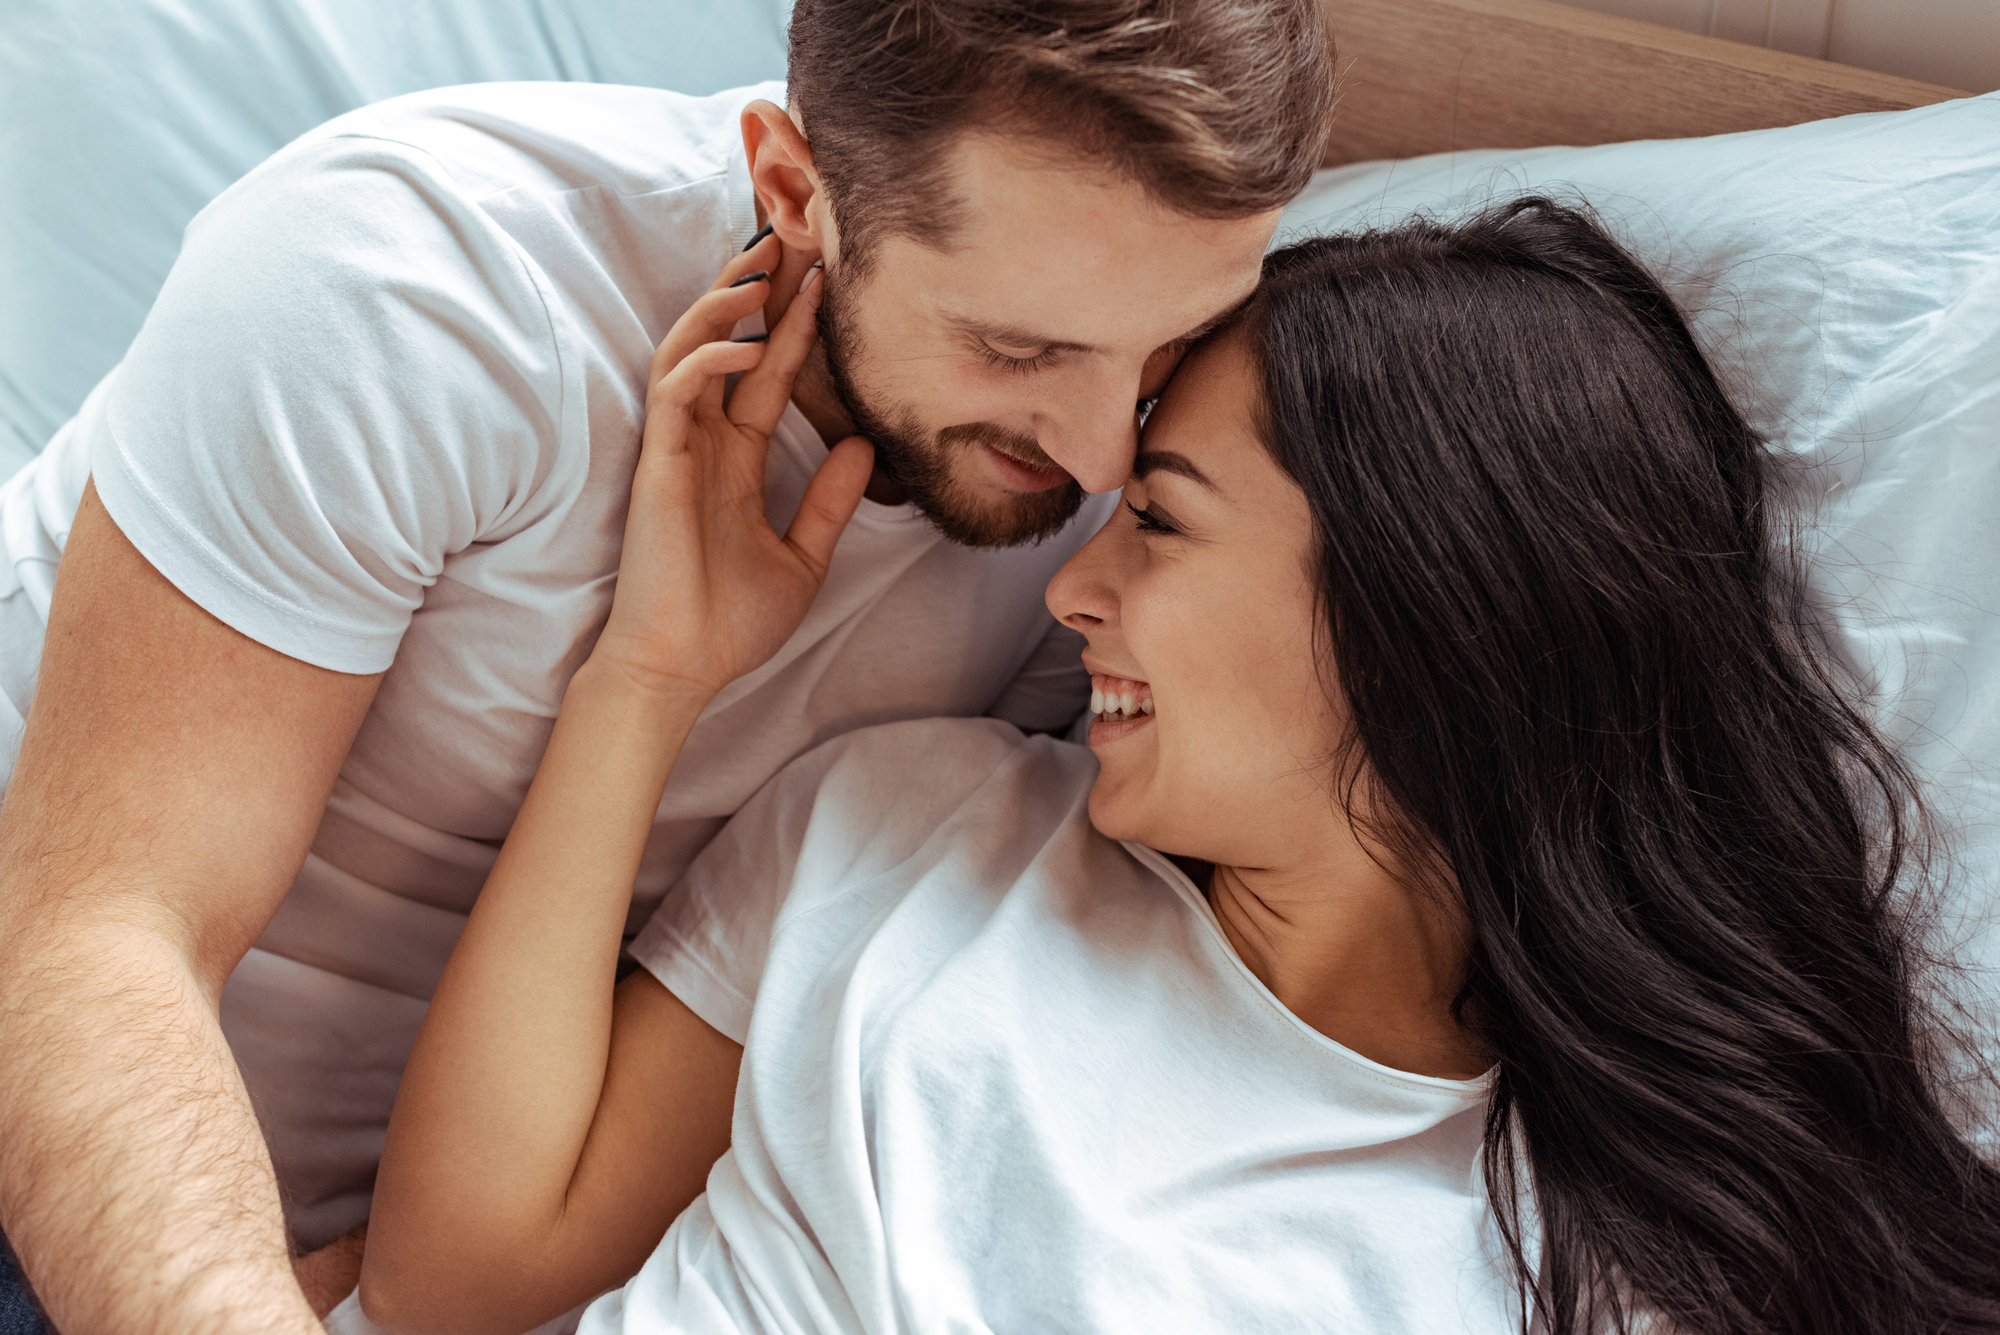 5 Ways to Help Your Wife Have an Orgasm